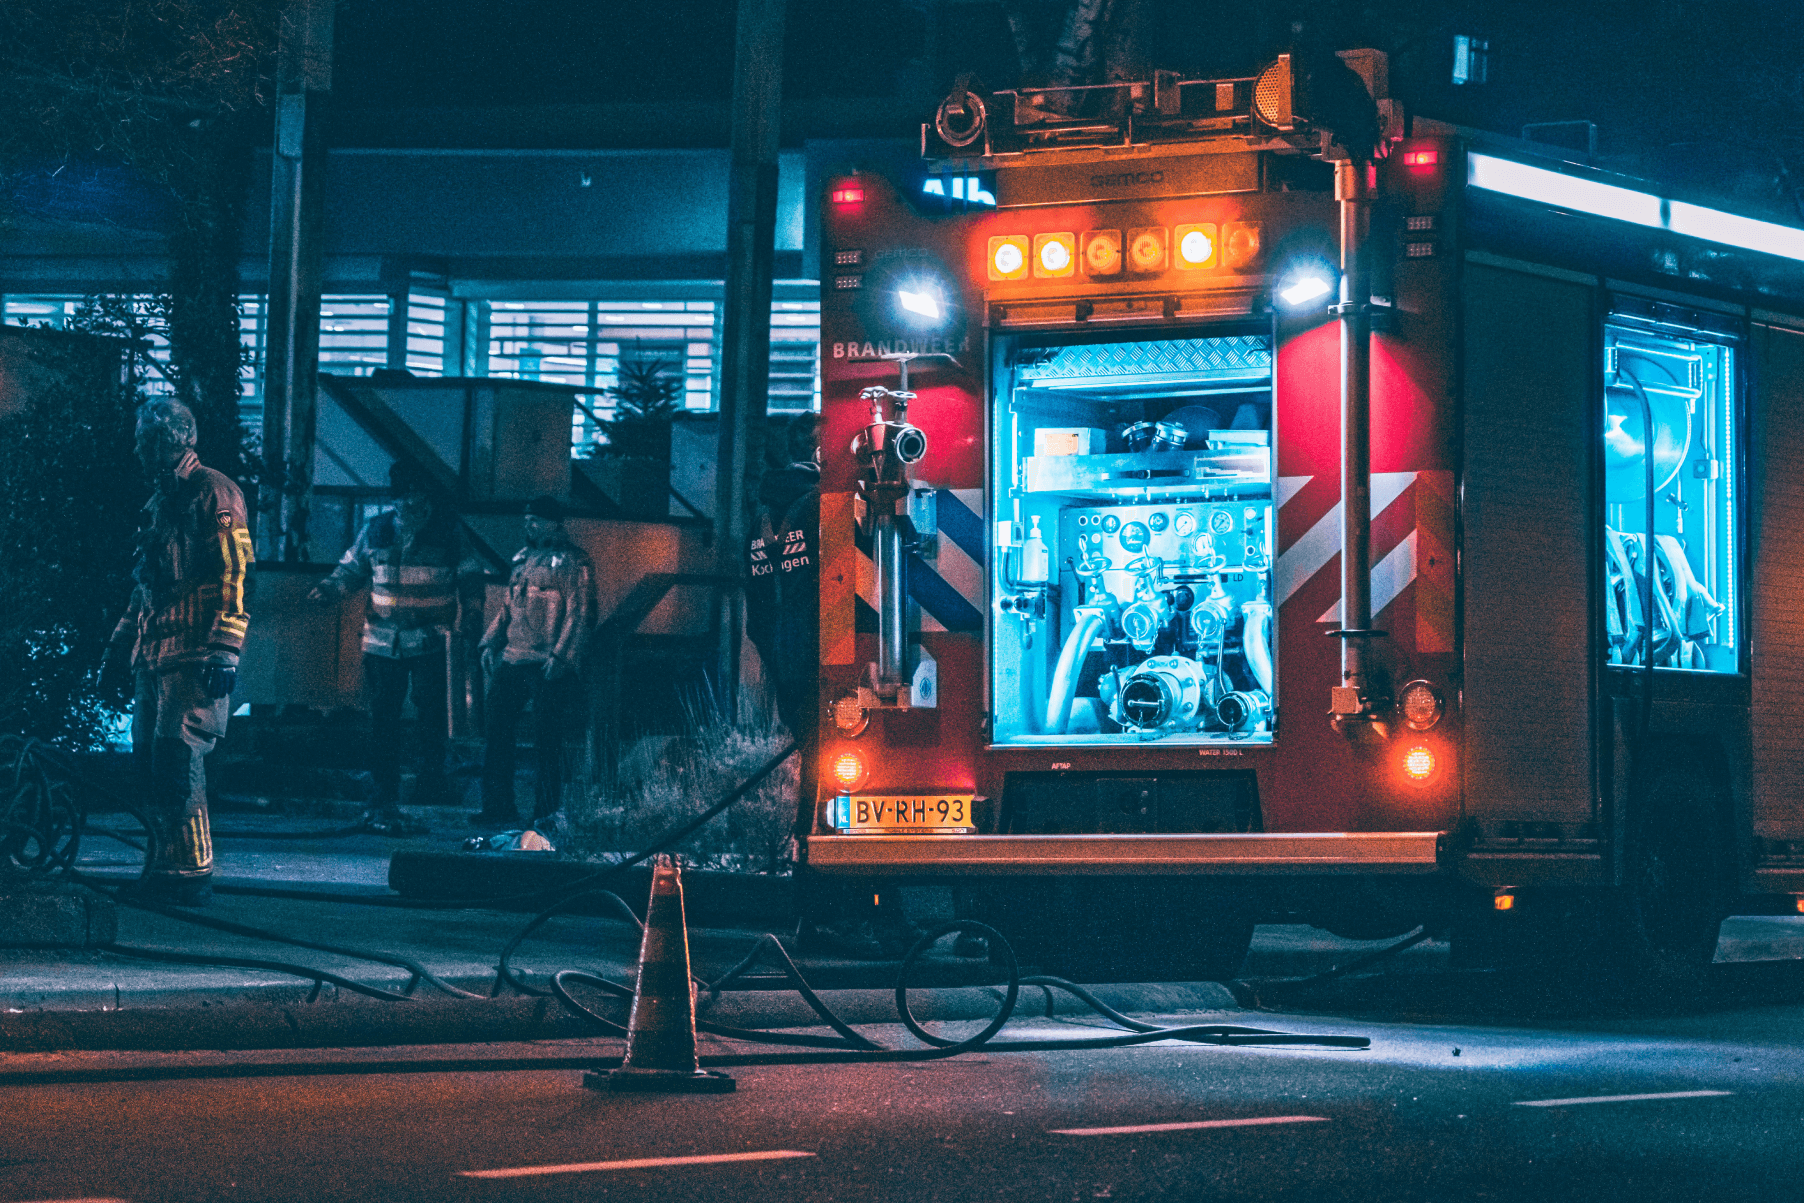 fire truck at night